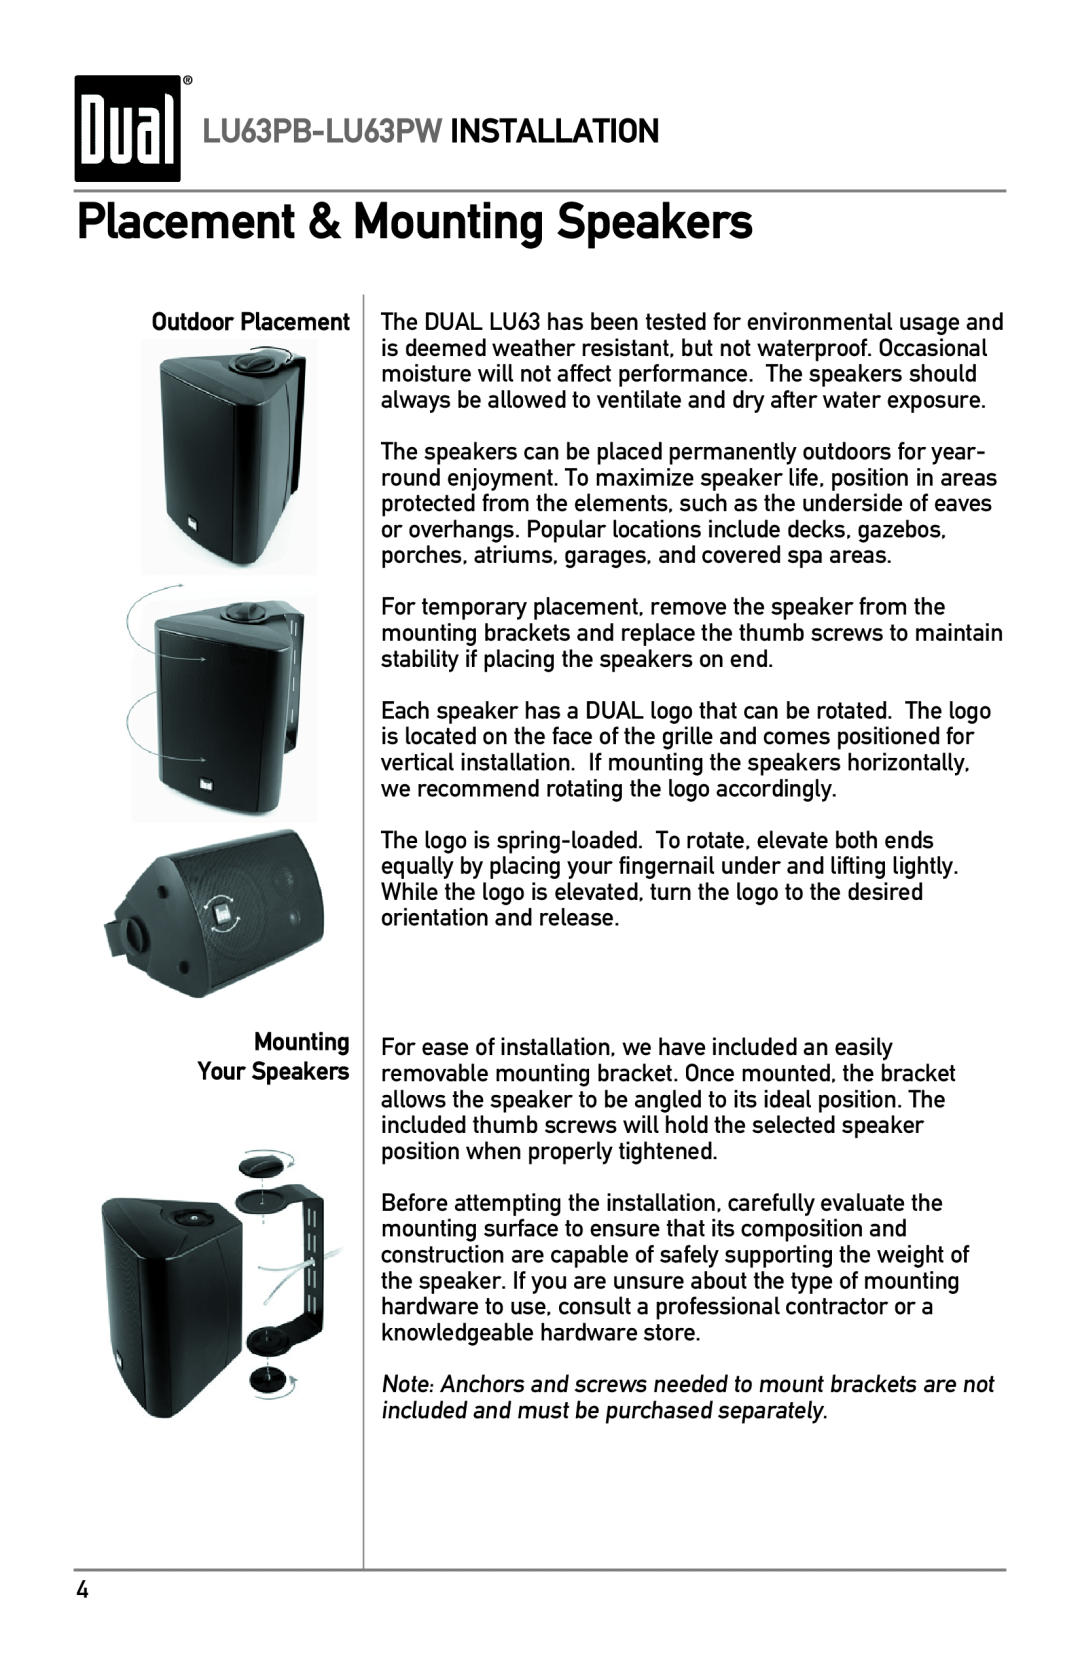 Dual LU63PB/PW owner manual Placement & Mounting Speakers, LU63PB-LU63PW INSTALLATION, Outdoor Placement 